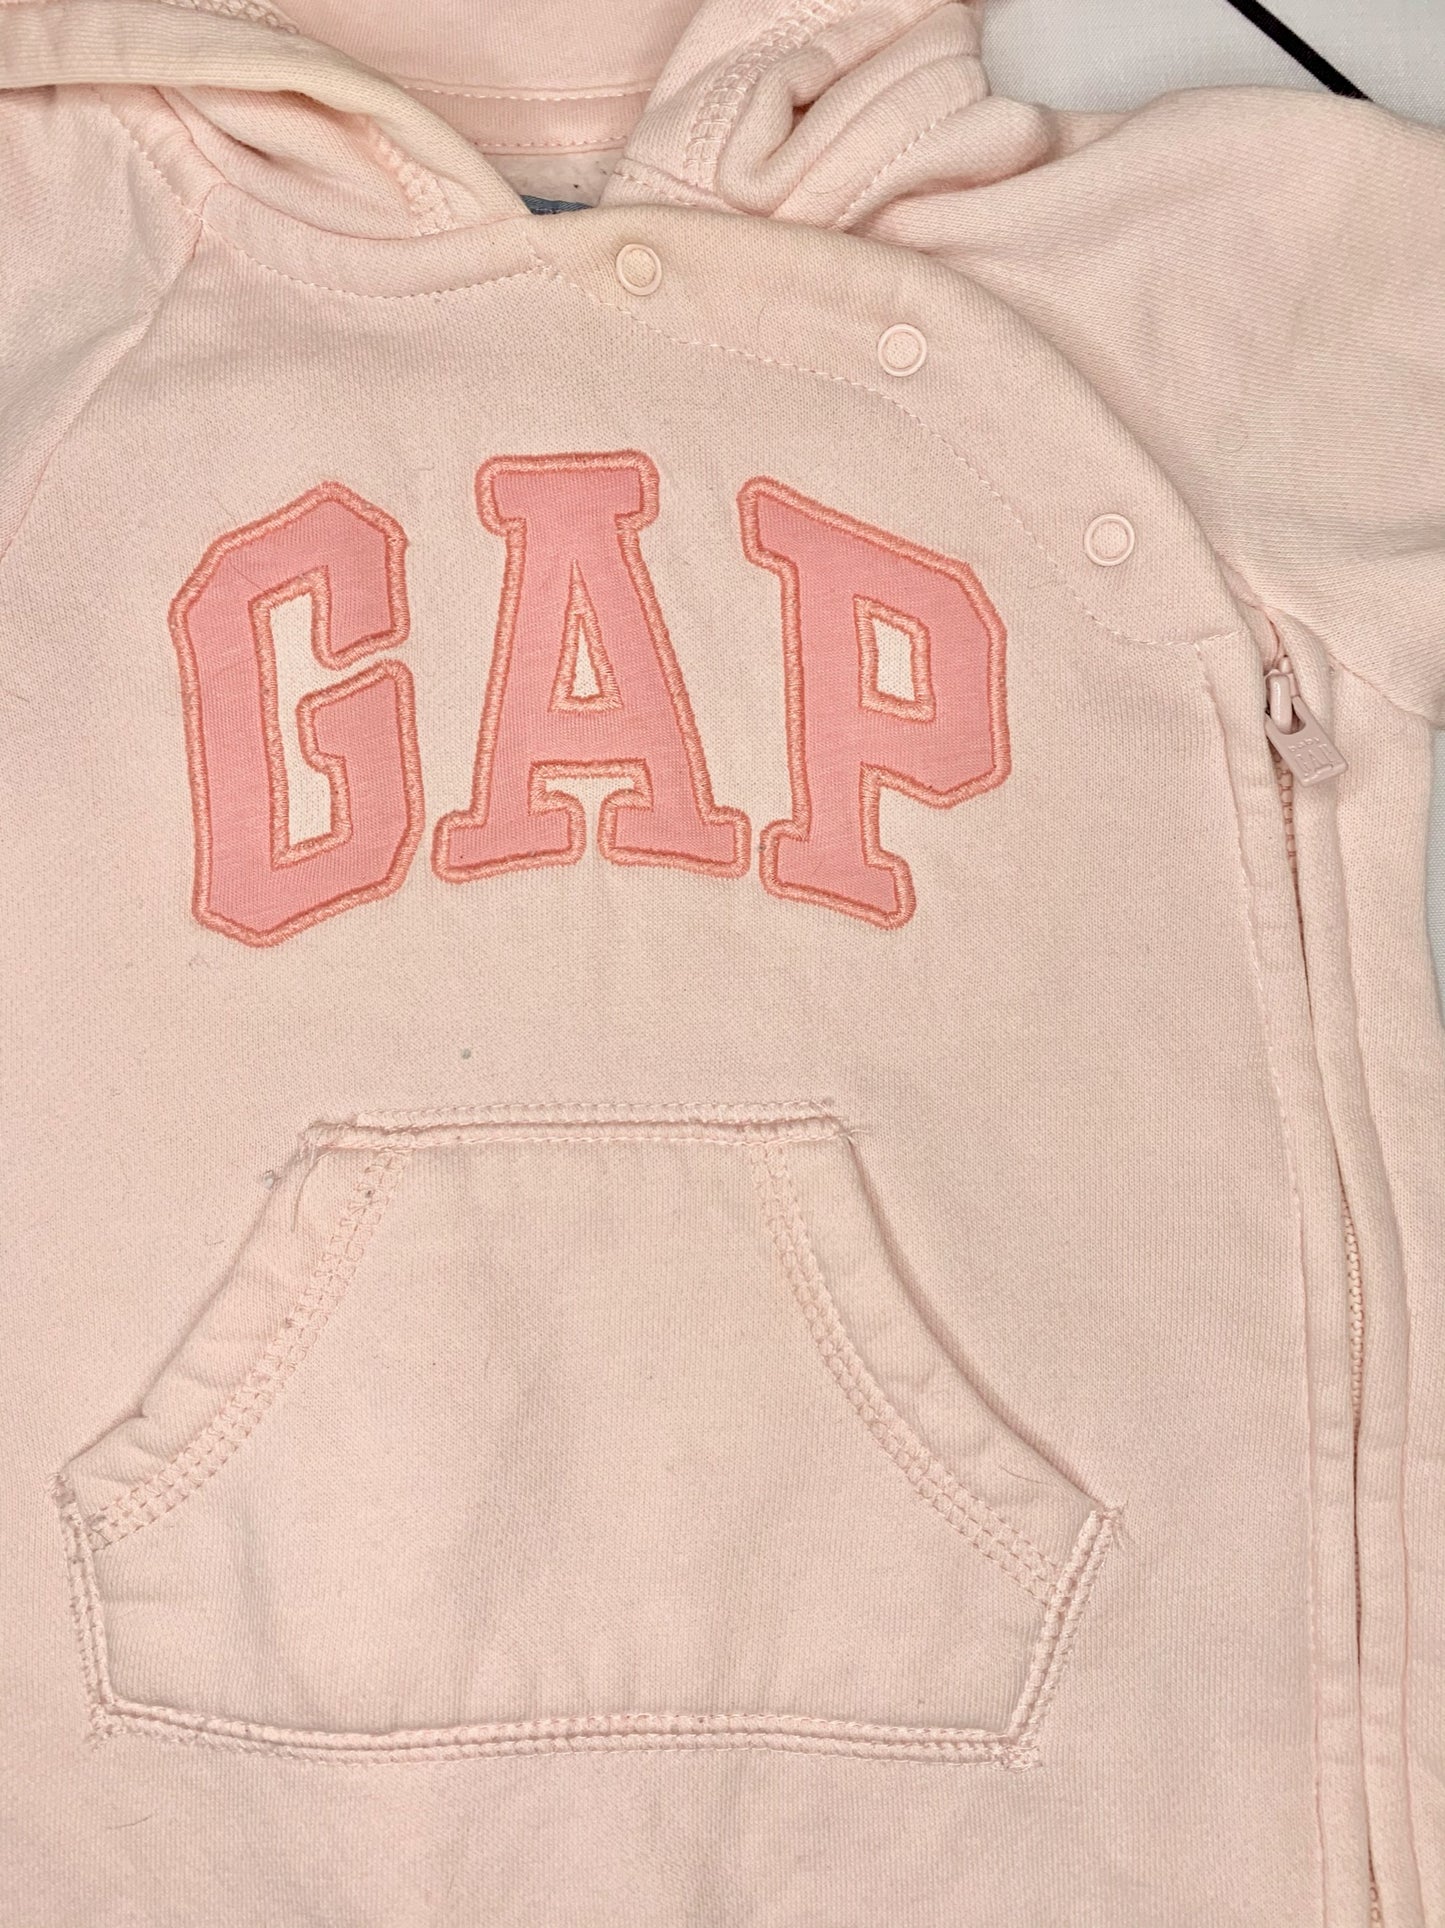 Pink Bear One-Piece Zip up Outfit- 6/9 Months